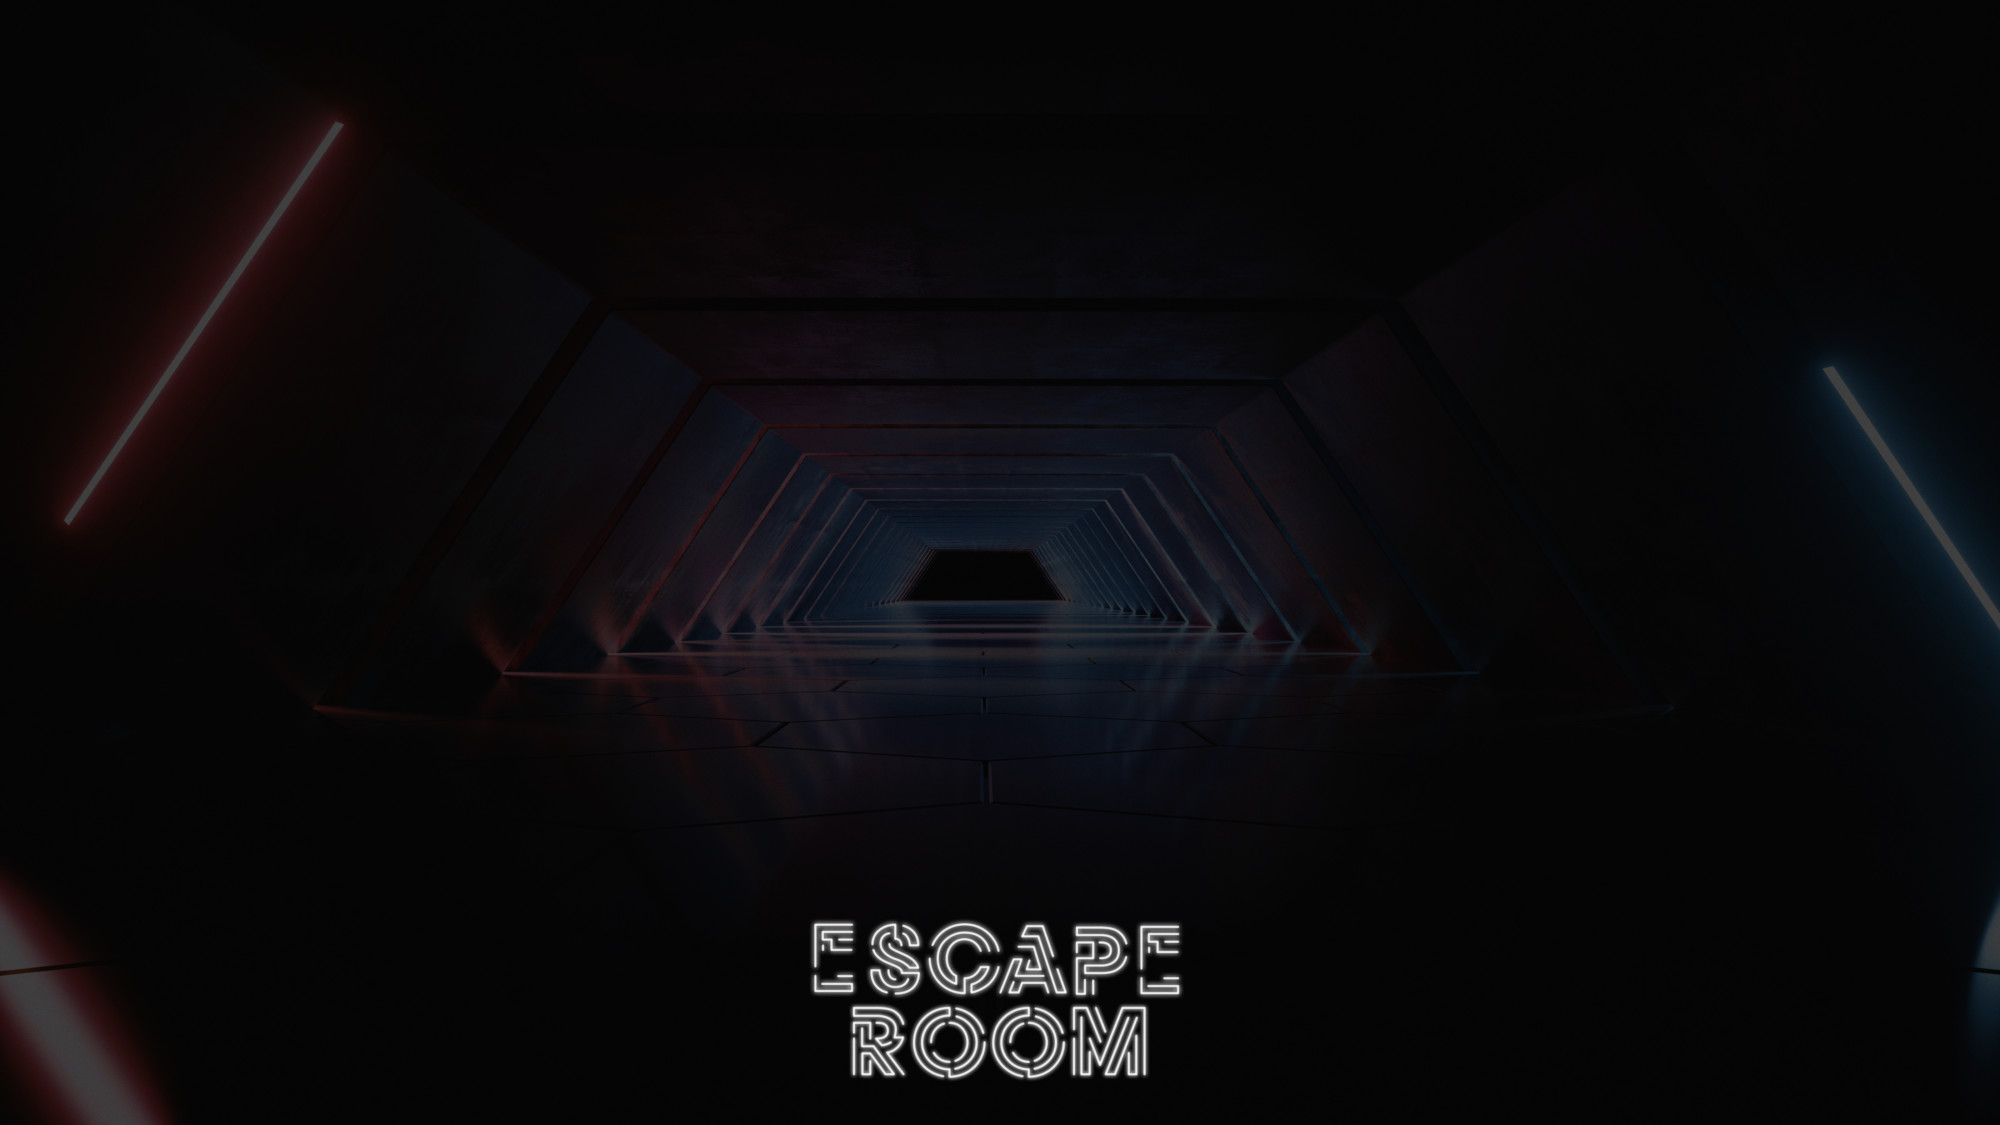 Family Event: Escape Room August 29th!